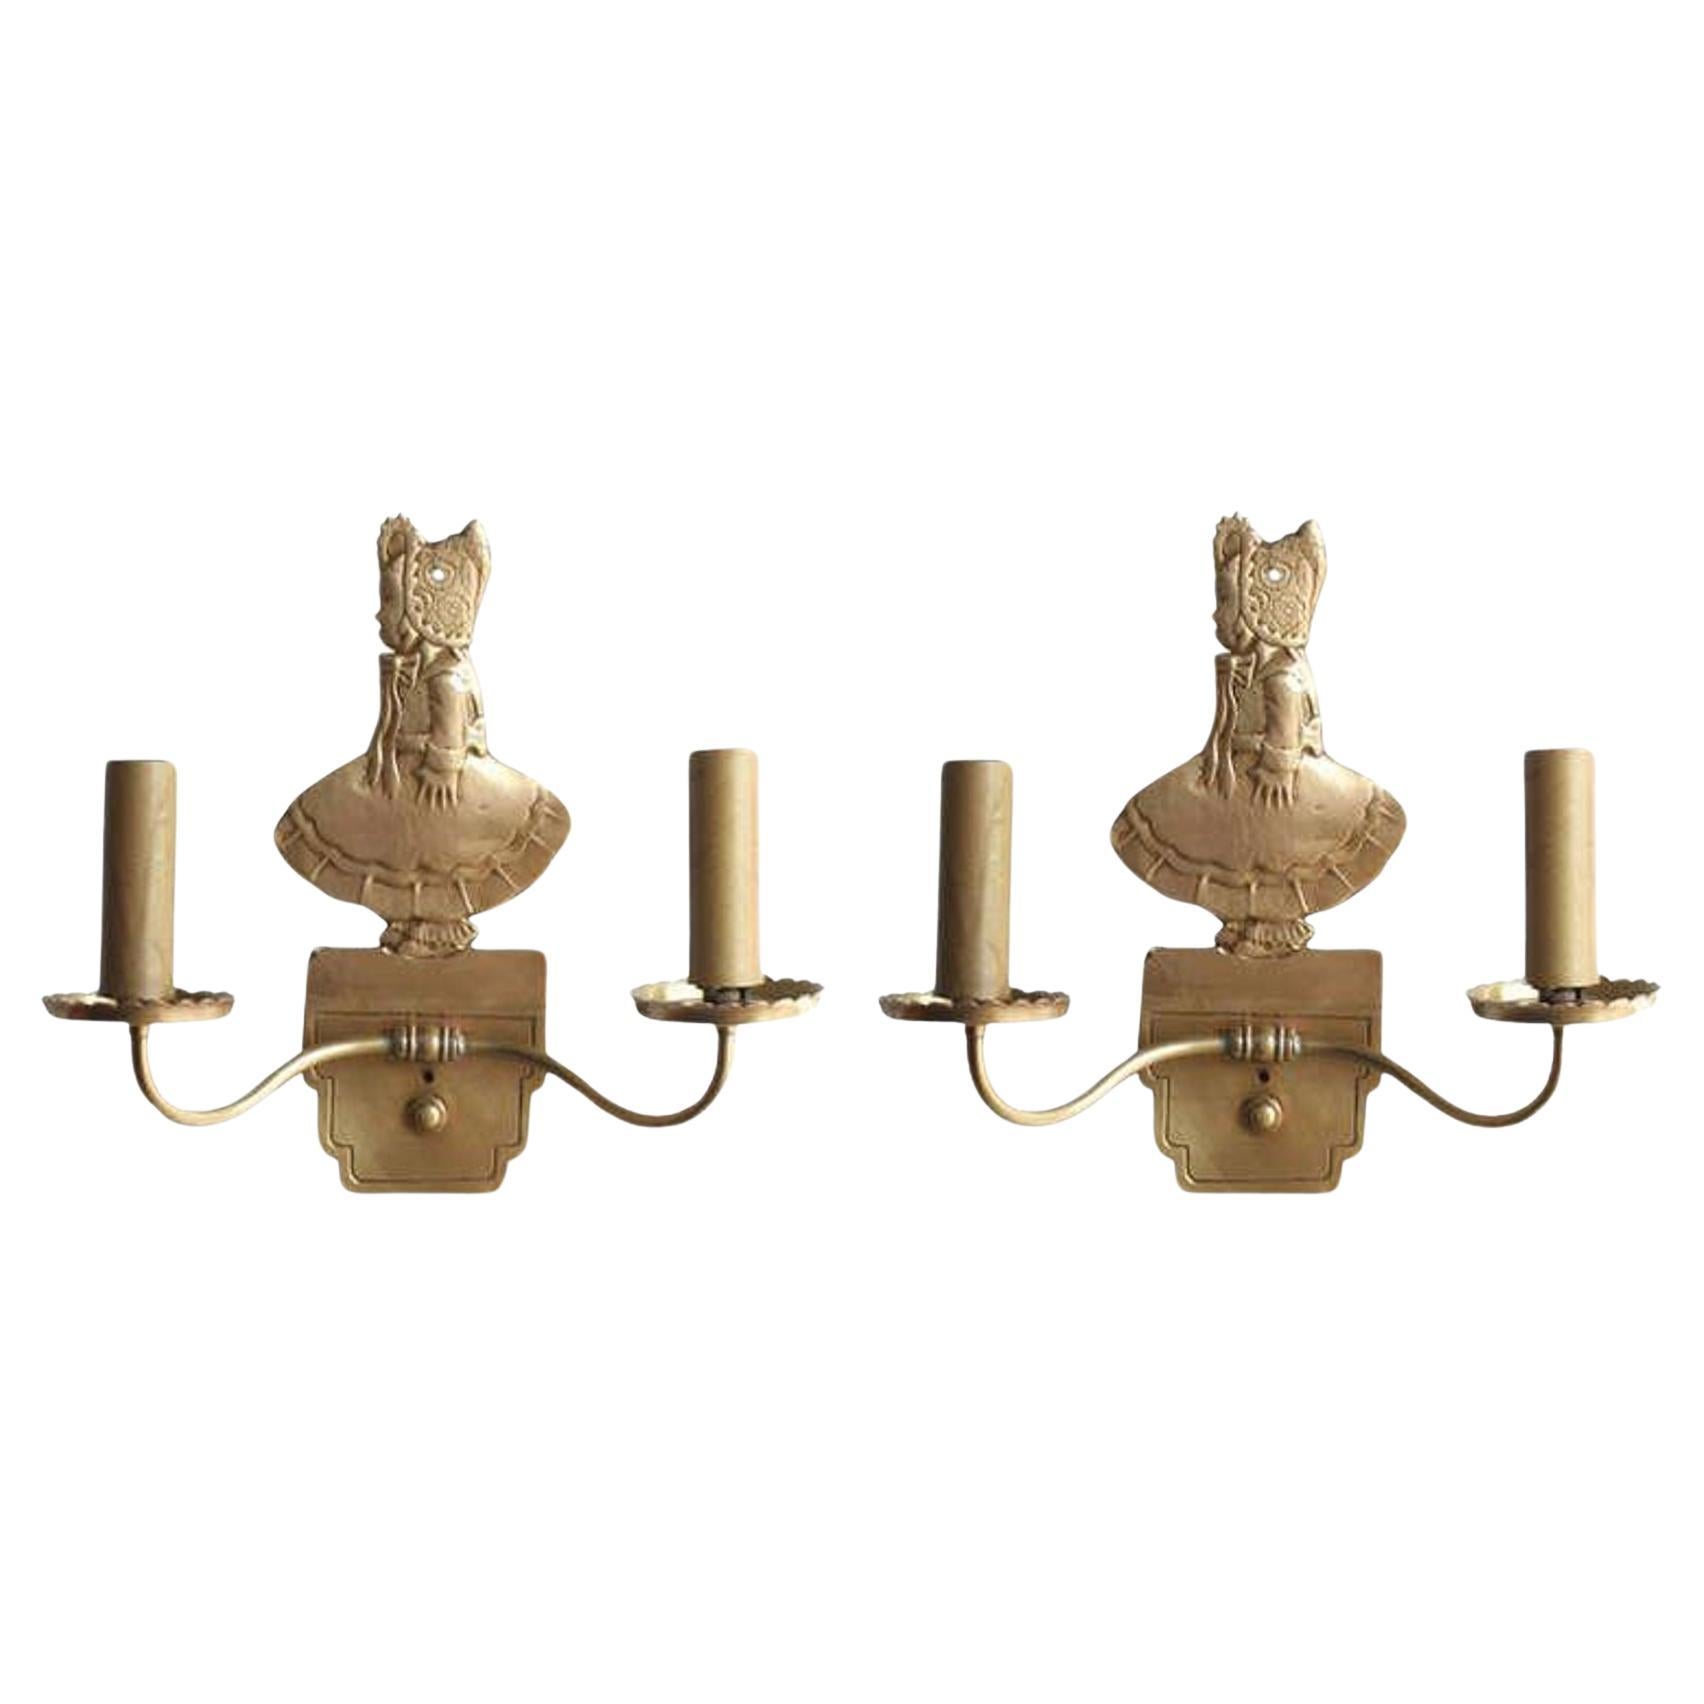 Bronze Electric Candelabra Wall Sconce with Girl in Bonnet, Pair